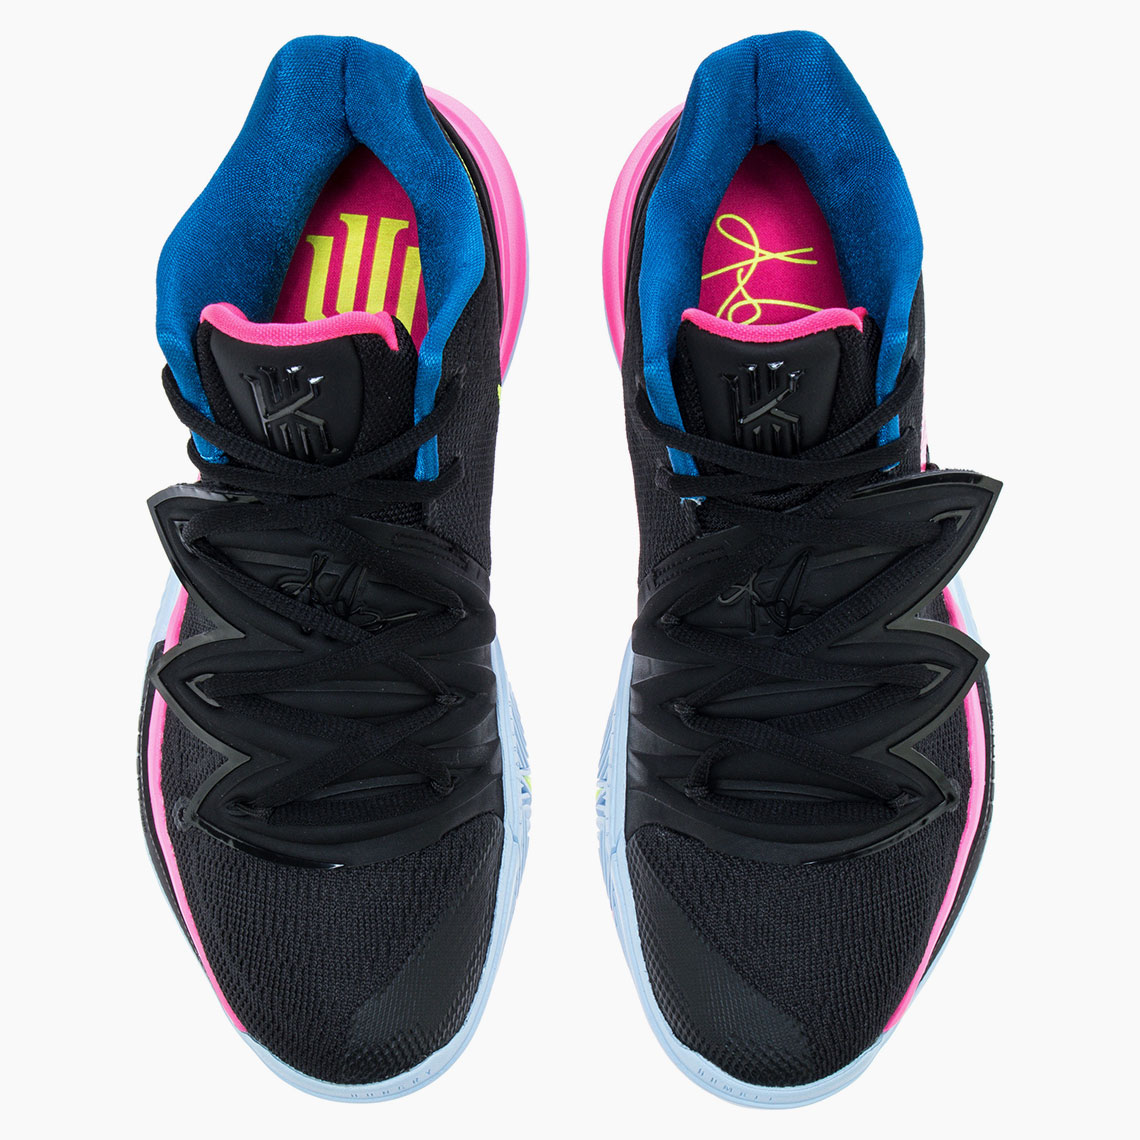 kyrie irving 5 just do it